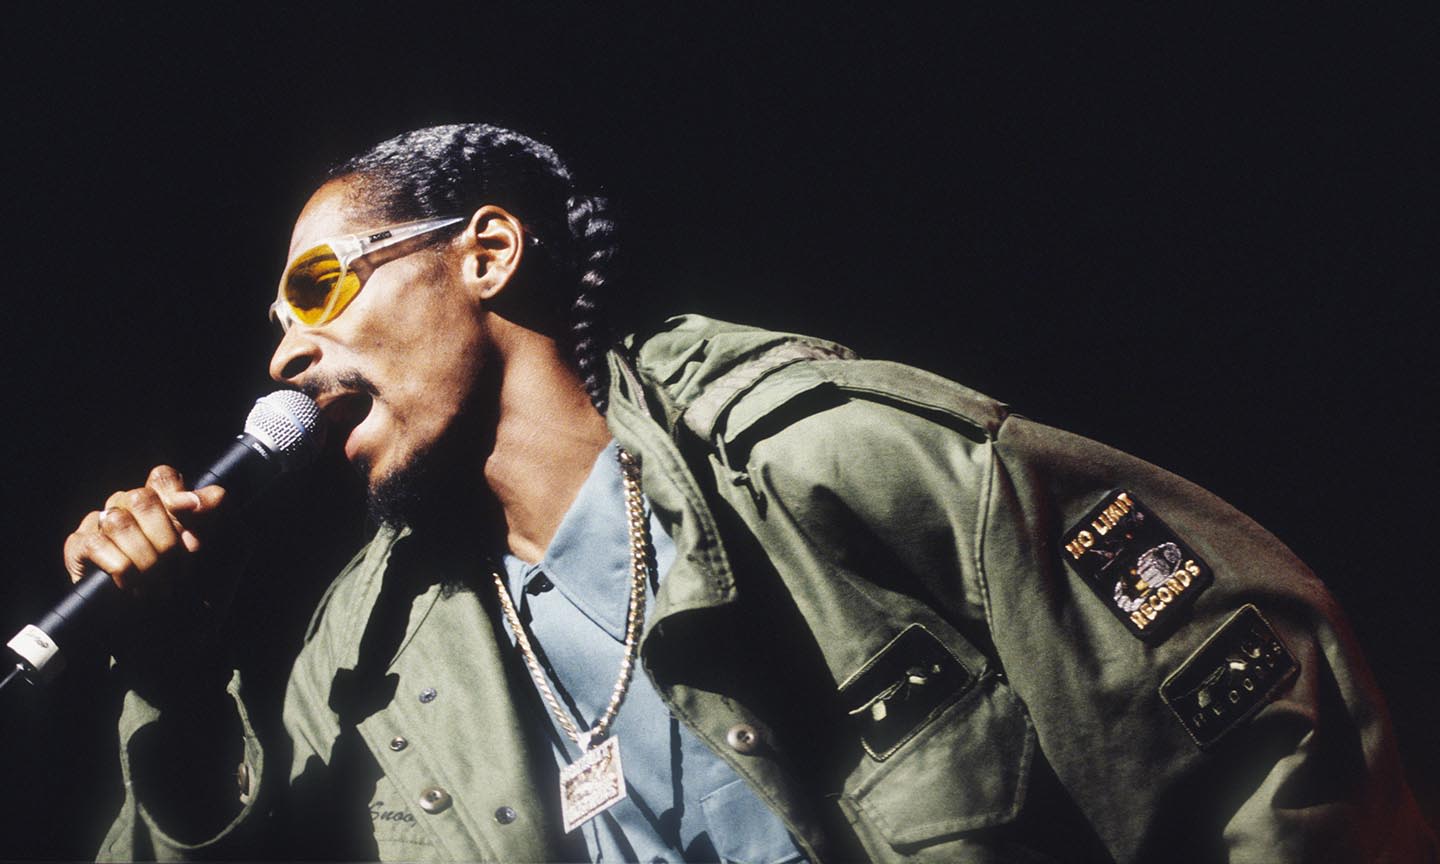 Two Classic 1990s Snoop Dogg Albums Are Getting Vinyl Reissues